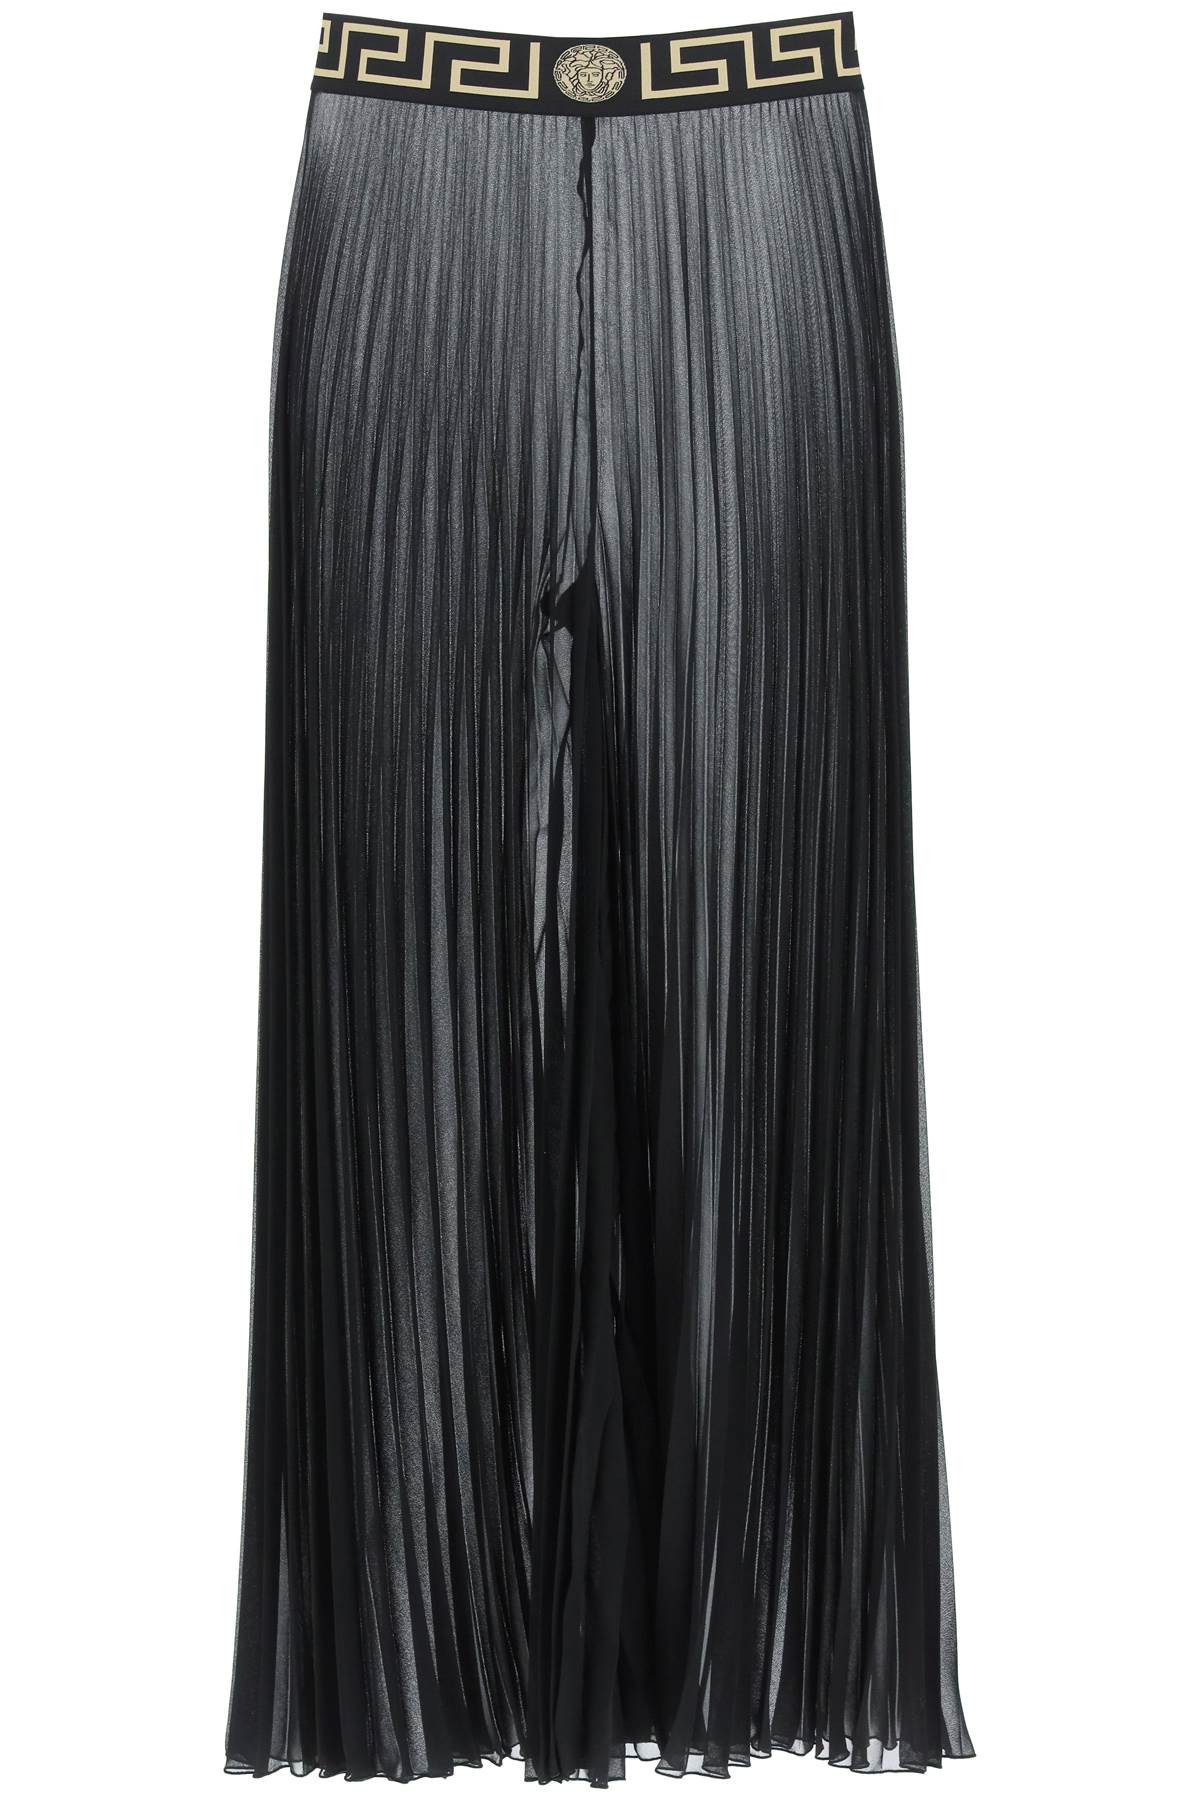 Versace Pleated Pareo Trousers